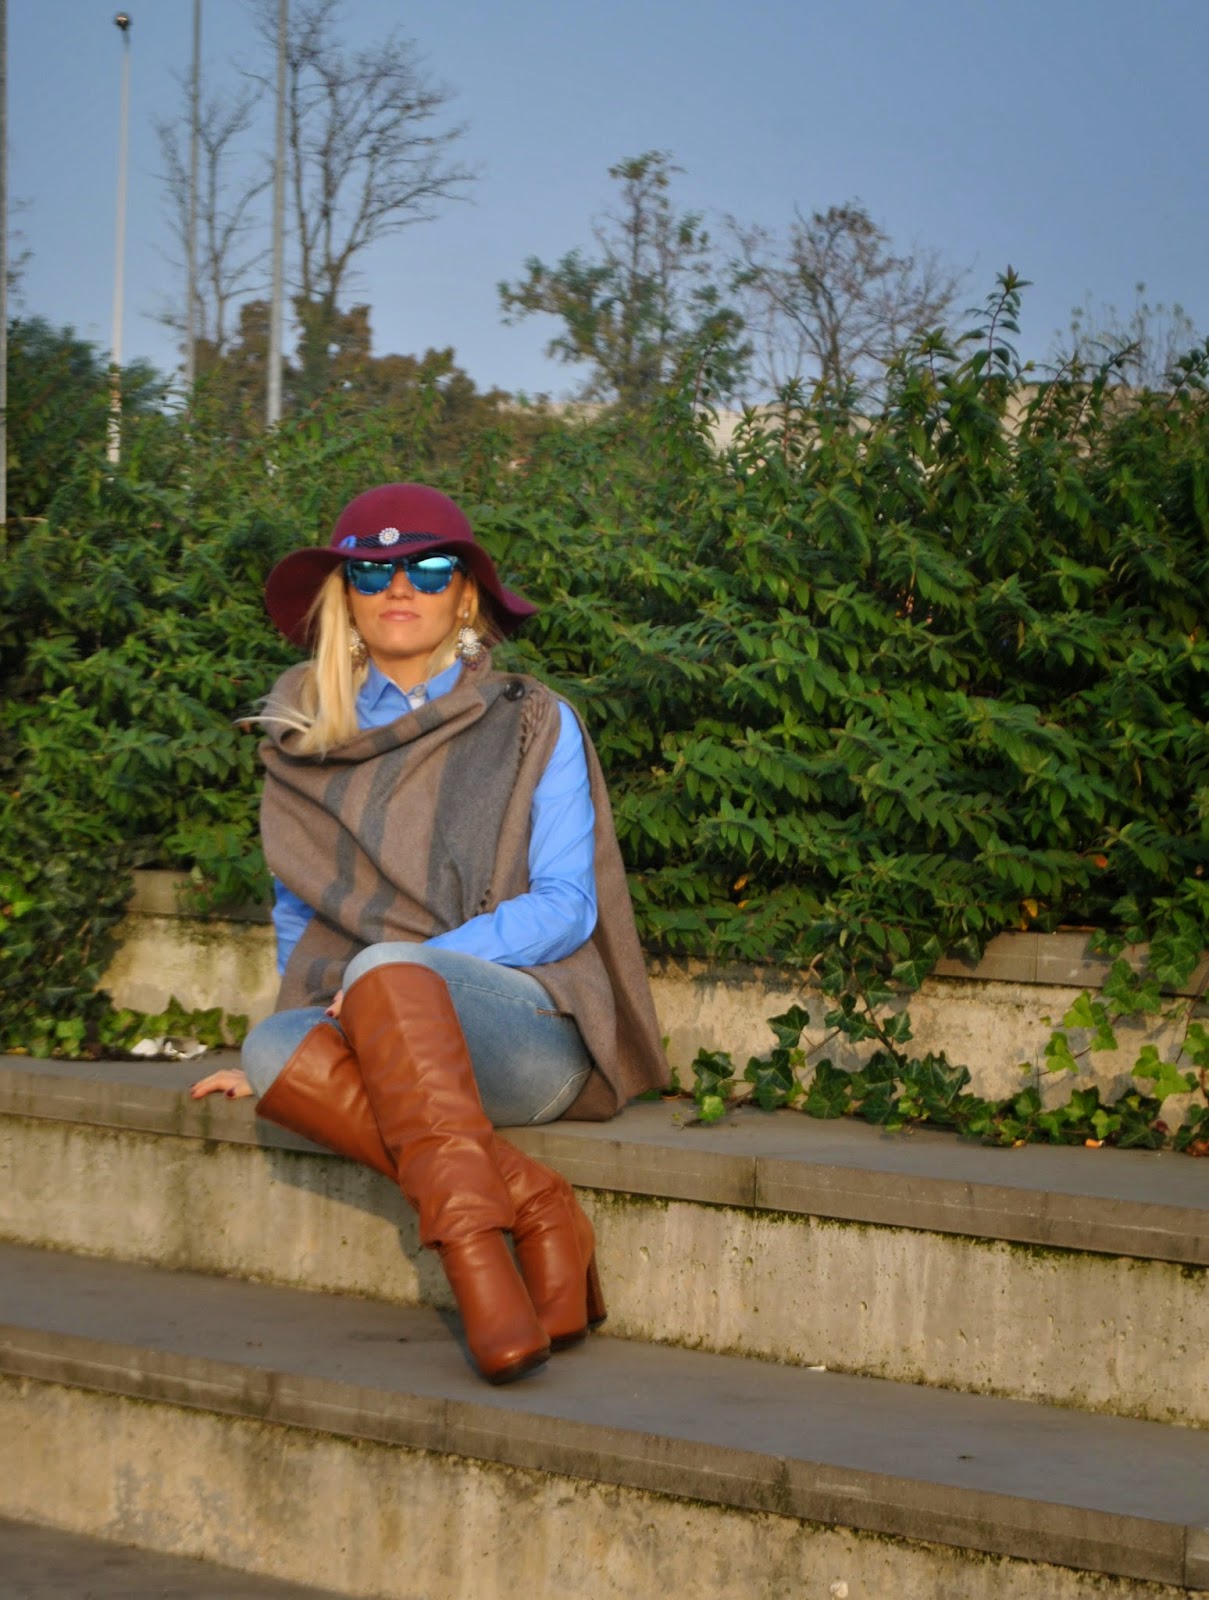  autumnal outfit  how to wear cape outfit cape cape street style outfit hat fashion bloggers italy italian girl  outfit mantella outfit casual abbinamenti mantella outfit jeans e mantella outfit stivali cuissardes outfit camicia azzurra outfit jeans fornarina come abbinare la mantella outfit cappello zara jeans e stivali abbinamenti stivali e jeans orecchini majique majique london earringss zara hat fornarina botton up mantella liu jo how to wear cape outfit cape outfit autunnali outfit casual autunnali outfit ottobre 2014 fashion blogger italiane fashion blogger bionde mariafelicia magno fashion blogger outfit colorblock by felym mariafelicia magno fashion blogger di color block by felym come abbinare il cappello cappello burgundy majique london earrings occhiali da sole con lenti a specchio azzurre excape